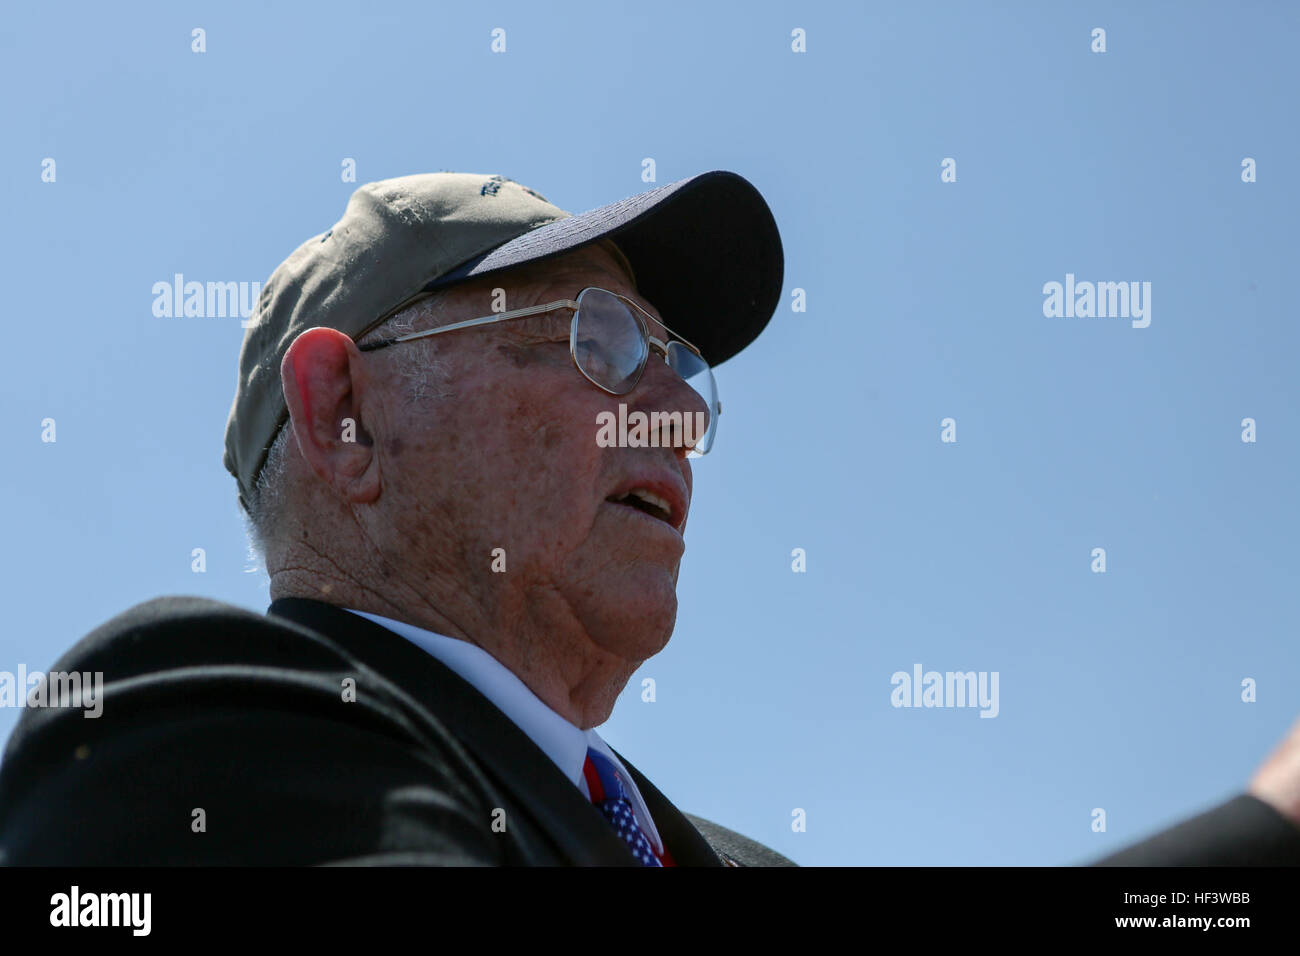 Gene Bell, a U.S. Marine Corps veteran of the Battle of Iwo Jima, attends the 71st Reunion of Honor Ceremony at Iwo To, Japan, March 19, 2016. The Iwo Jima Reunion of Honor is an opportunity for Japanese and U.S. veterans and their families, dignitaries, leaders and service members from both nations to honor the battle while recognizing 71 years of peace and prosperity in the U.S. – Japanese alliance. (U.S. Marine Corps photo by MCIPAC Combat Camera Lance Cpl. Juan Esqueda / Released) Iwo Jima 71st Reunion of Honor 160319-M-JD520-074 Stock Photo